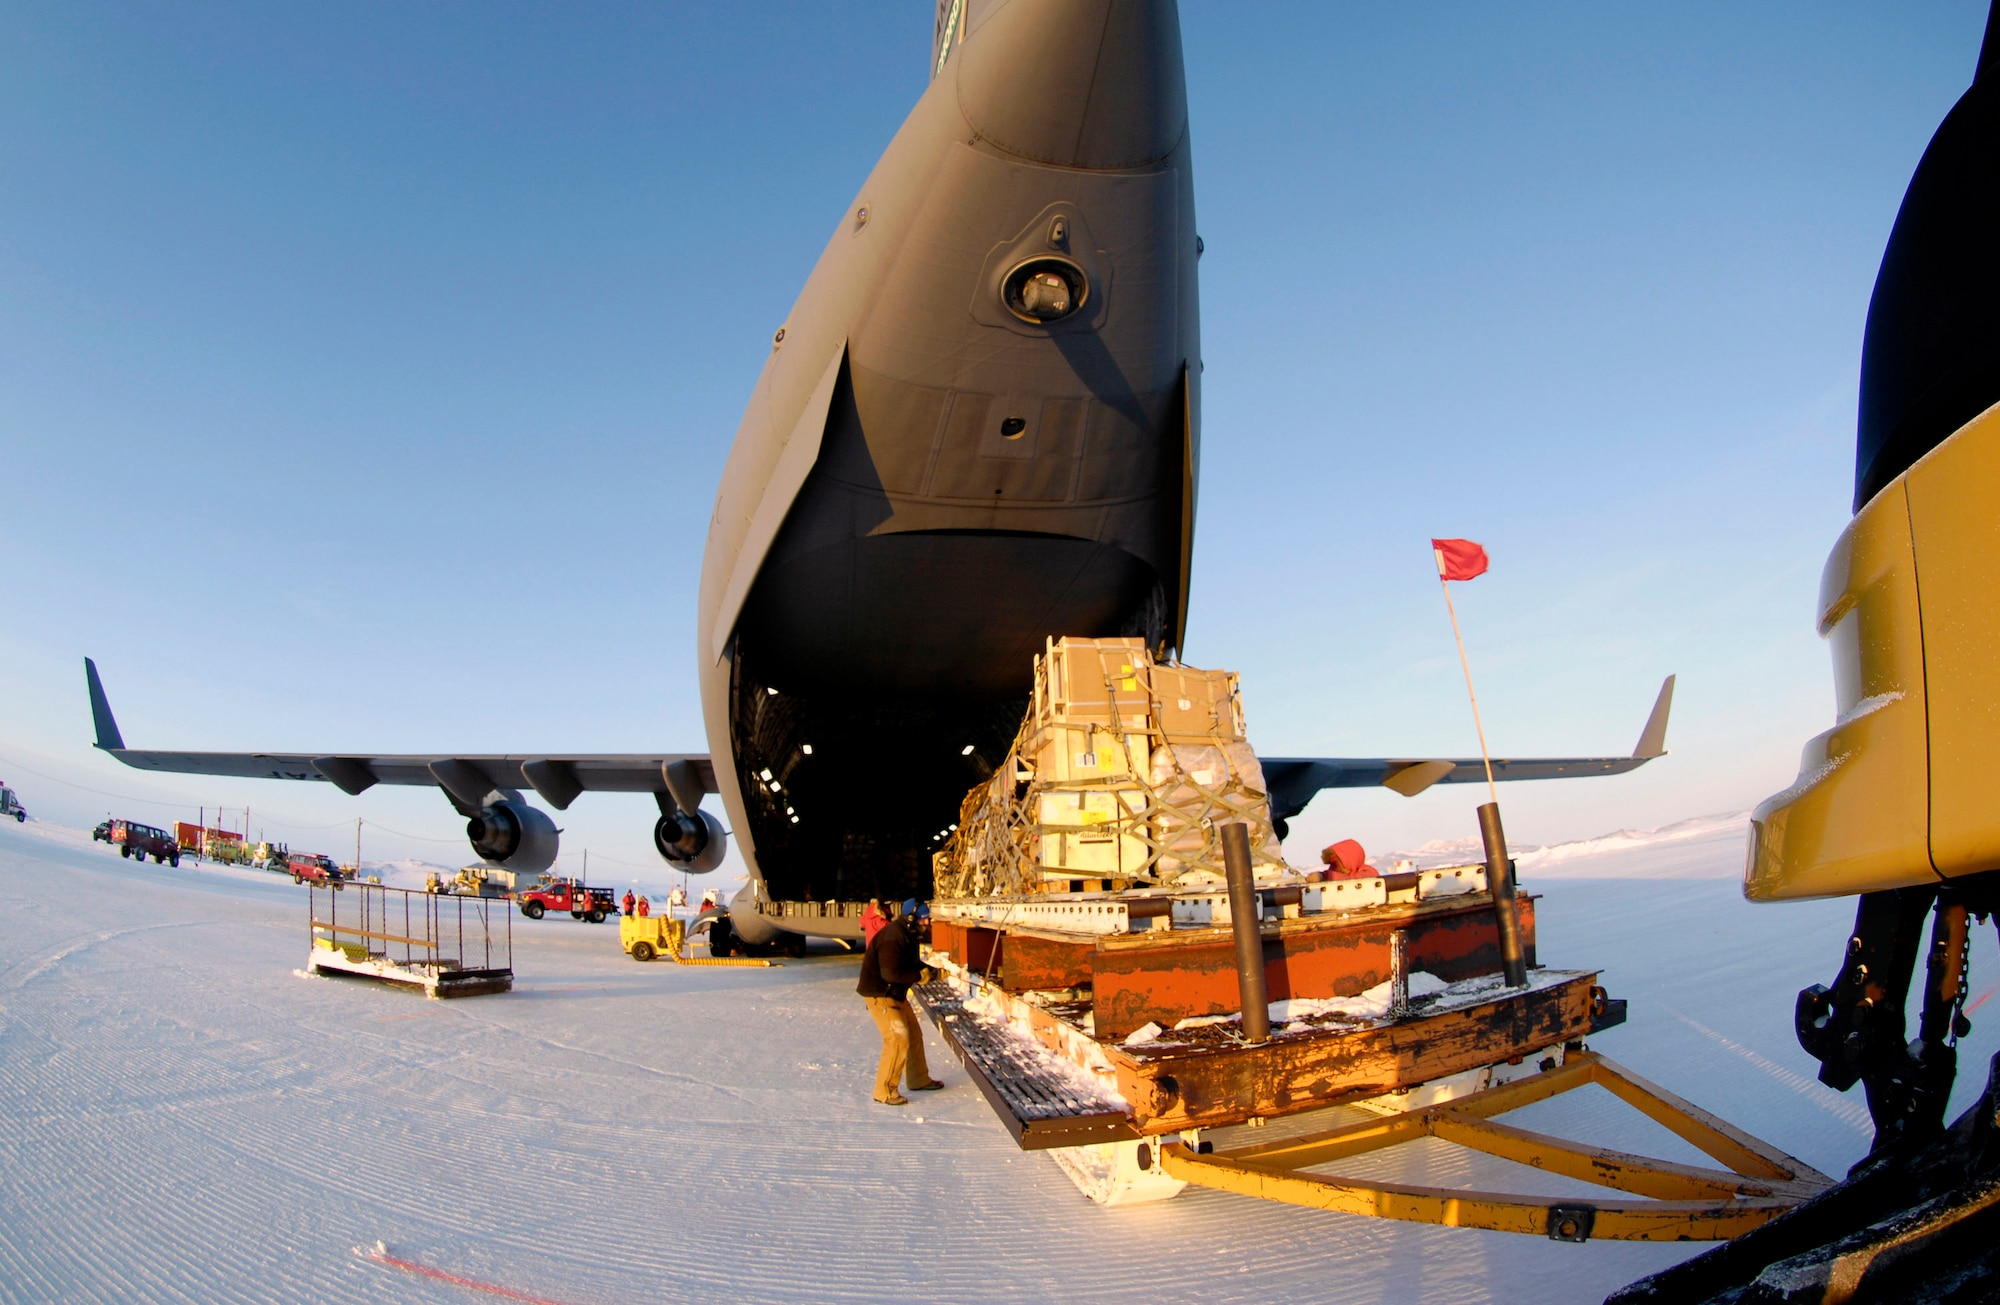 A pallet sled is used to unload cargo from a C-17 Globemaster III during an Operation Deep Freeze winter fly-in mission Aug. 25 at Pegasus White Ice Runway, Antarctica. A C-17 and 31 Airmen from McChord Air Force Base, Wash., conducted the annual winter fly-in augmentation of scientists, support staff, food and equipment for the U.S. Antarctic Program at McMurdo Station, Antarctica. (U.S. Air Force photo/Tech. Sgt. Shane A. Cuomo) 
